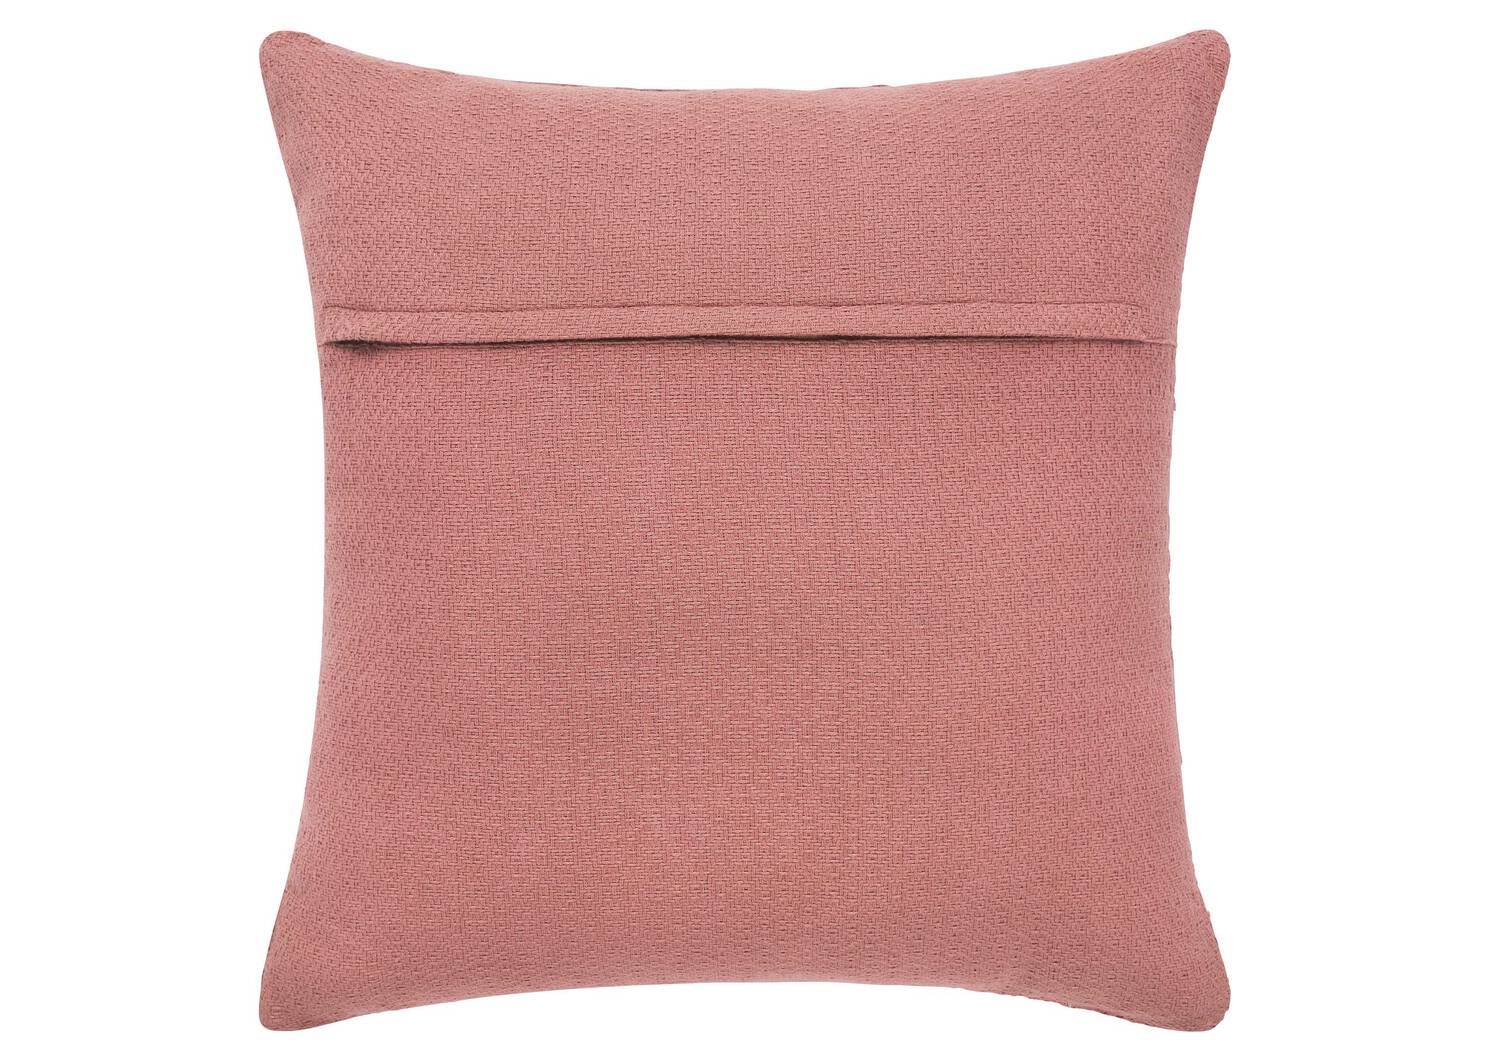 Coussin floral Camrose 20x20 ivoire/rose